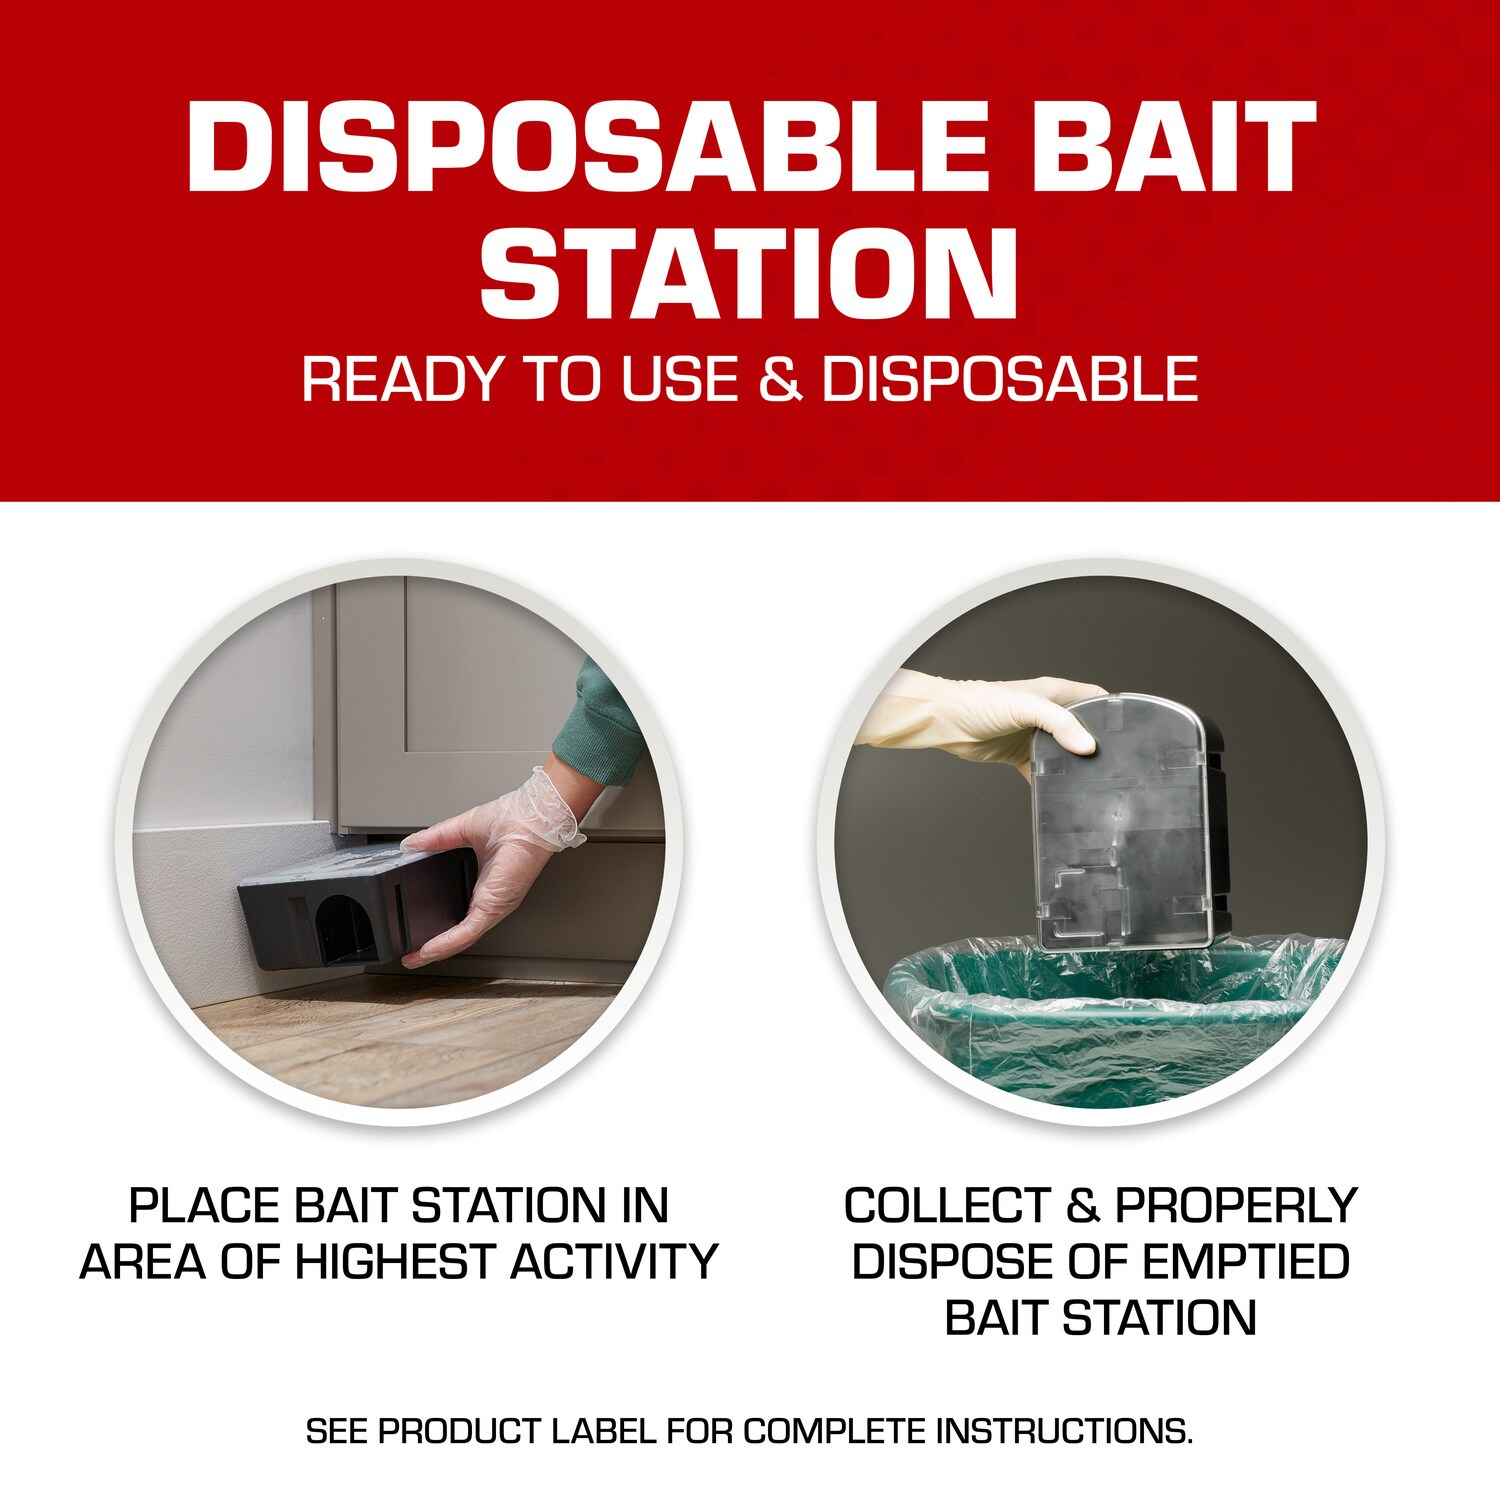 Exterminator's Choice - Bait Station - Includes 12 Small Bait Station and  One Key - Heavy Duty Bait Box for Mice and Other Pests - Durable and